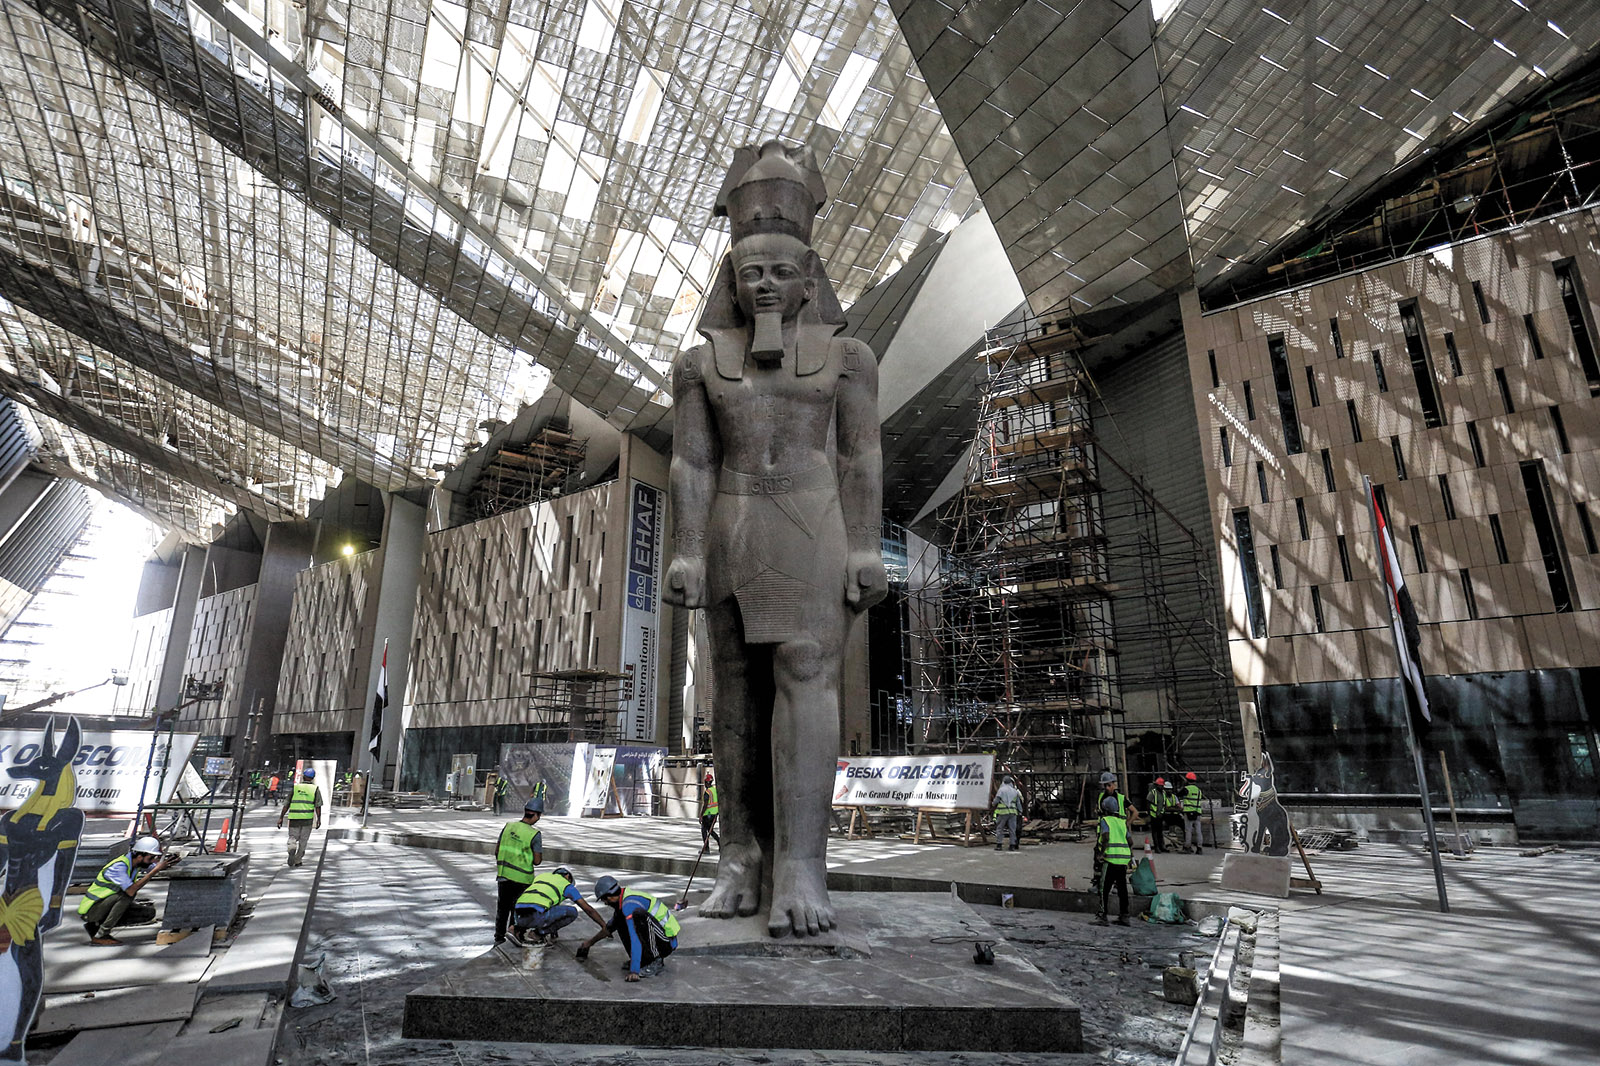 A statue of Ramses II in the Grand Egyptian Museum, which is being constructed on the Giza Plateau